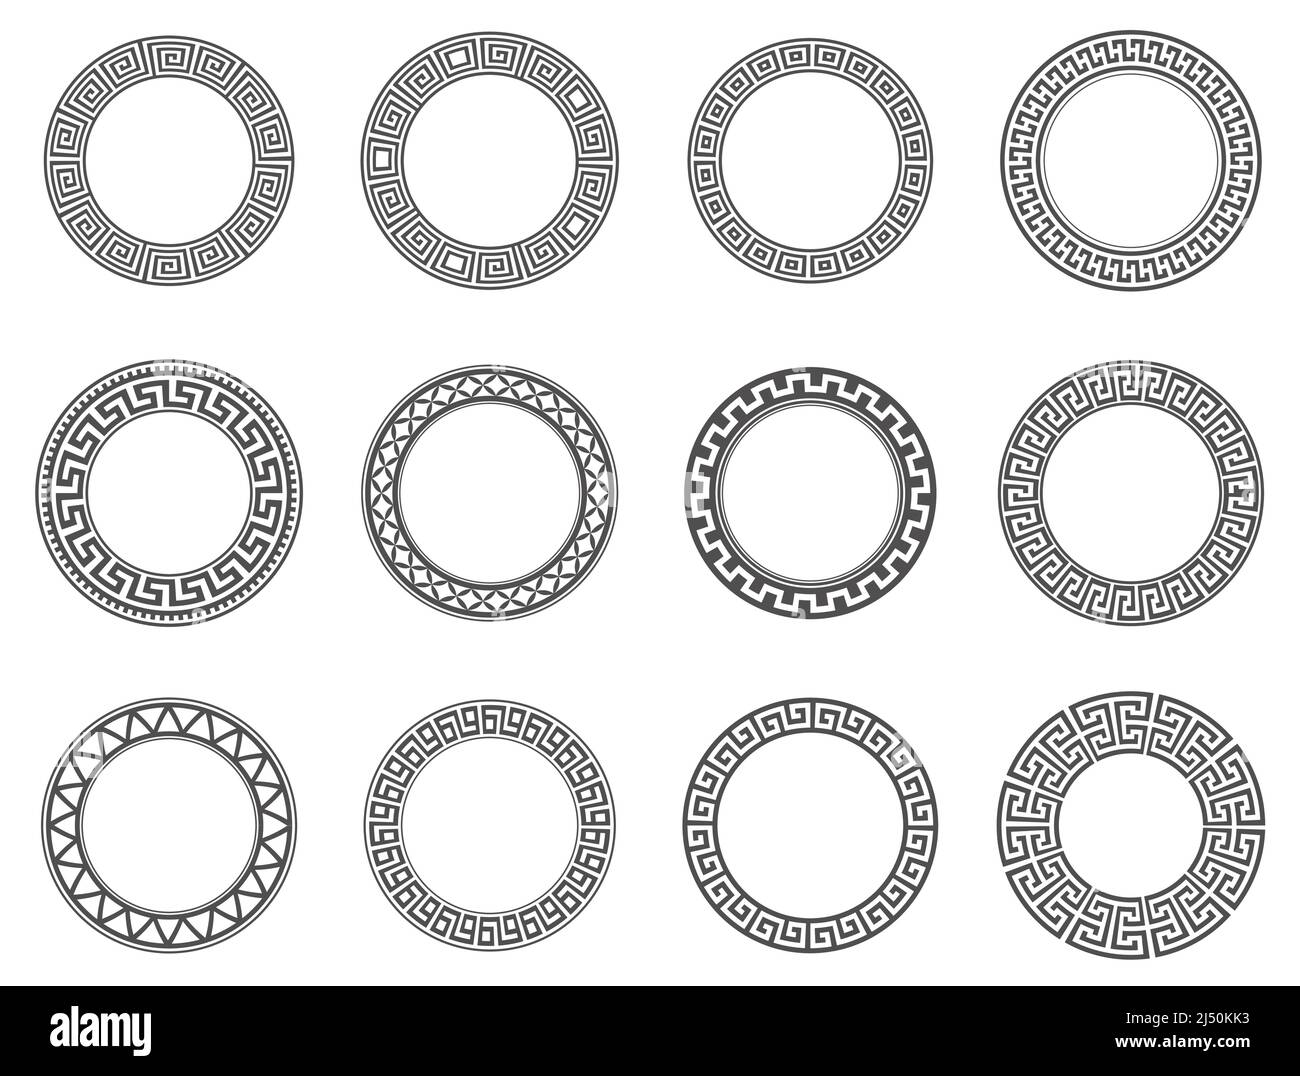 Circle greek frames. Round meander borders. Decoration elements patterns. Vector illustration isolated on white background. Stock Vector